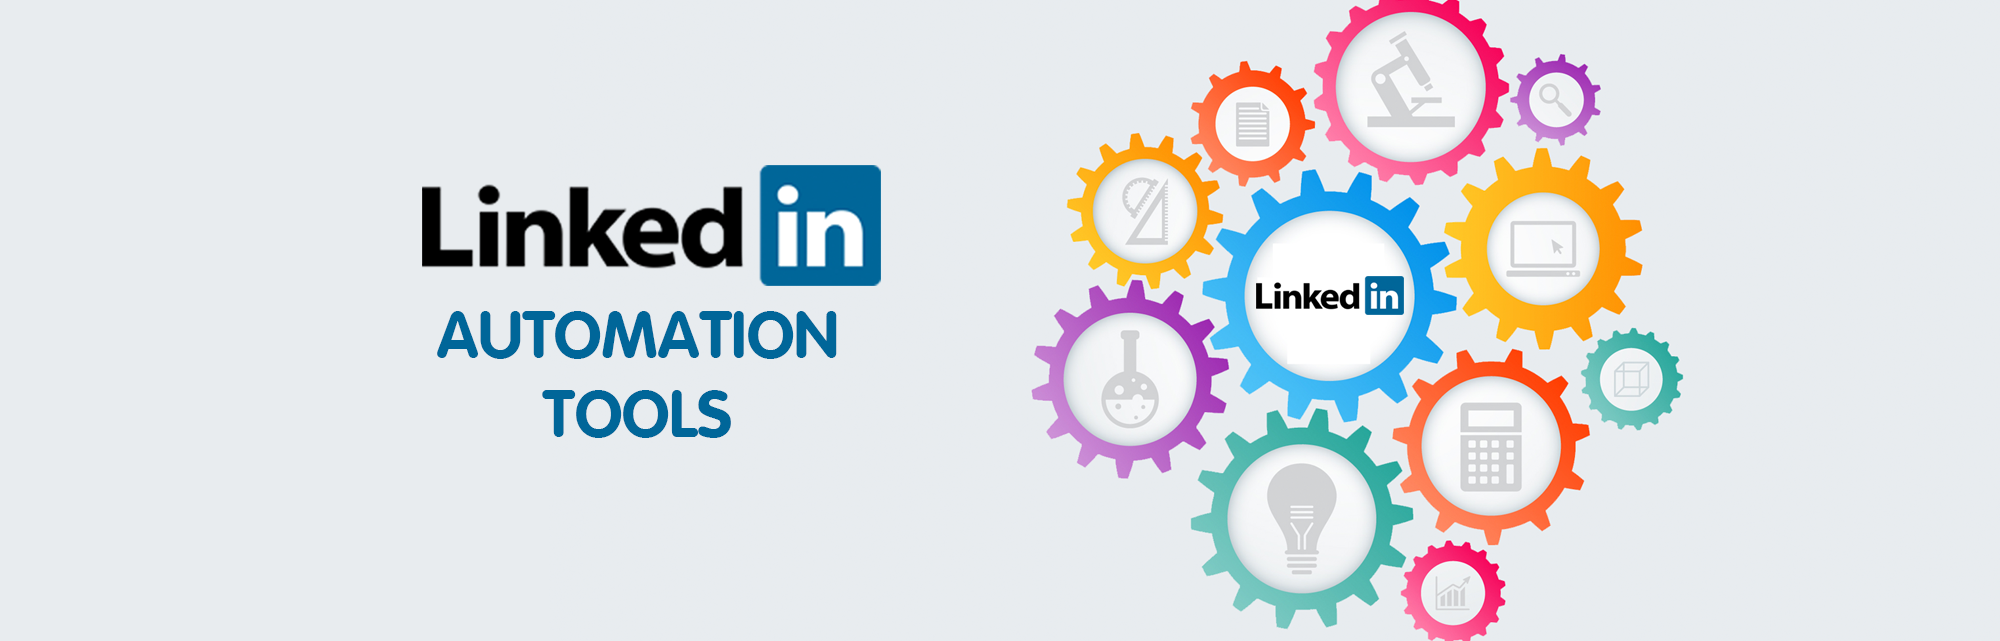 LinkedIn link Your Way To Success